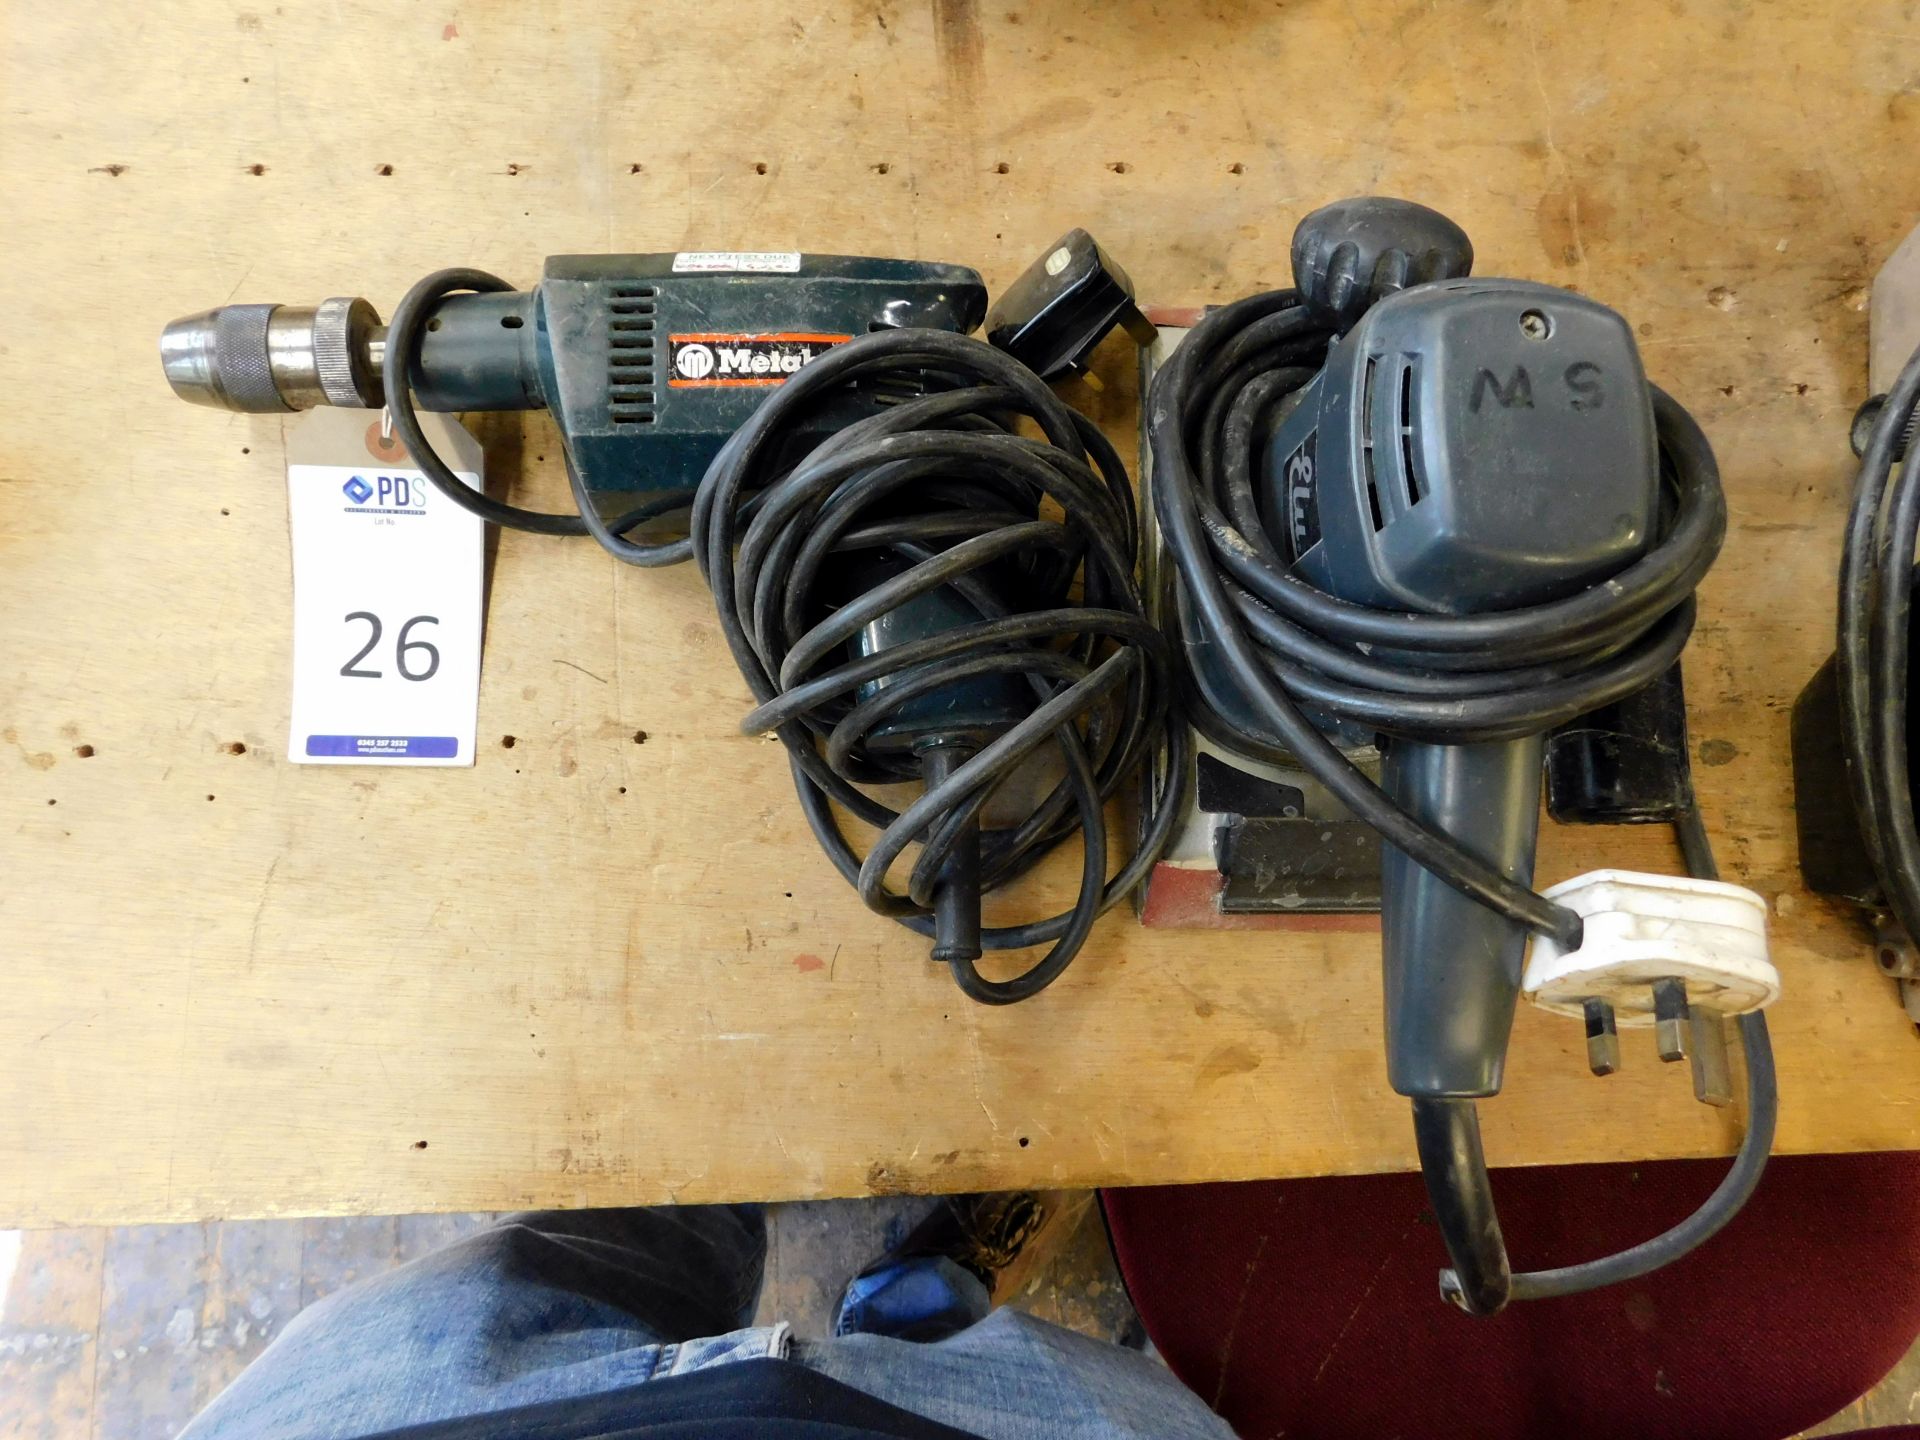 Mutabo 240v Drill & An Elu Pad Sander (Located Bethnal Green – Please see General Notes for More